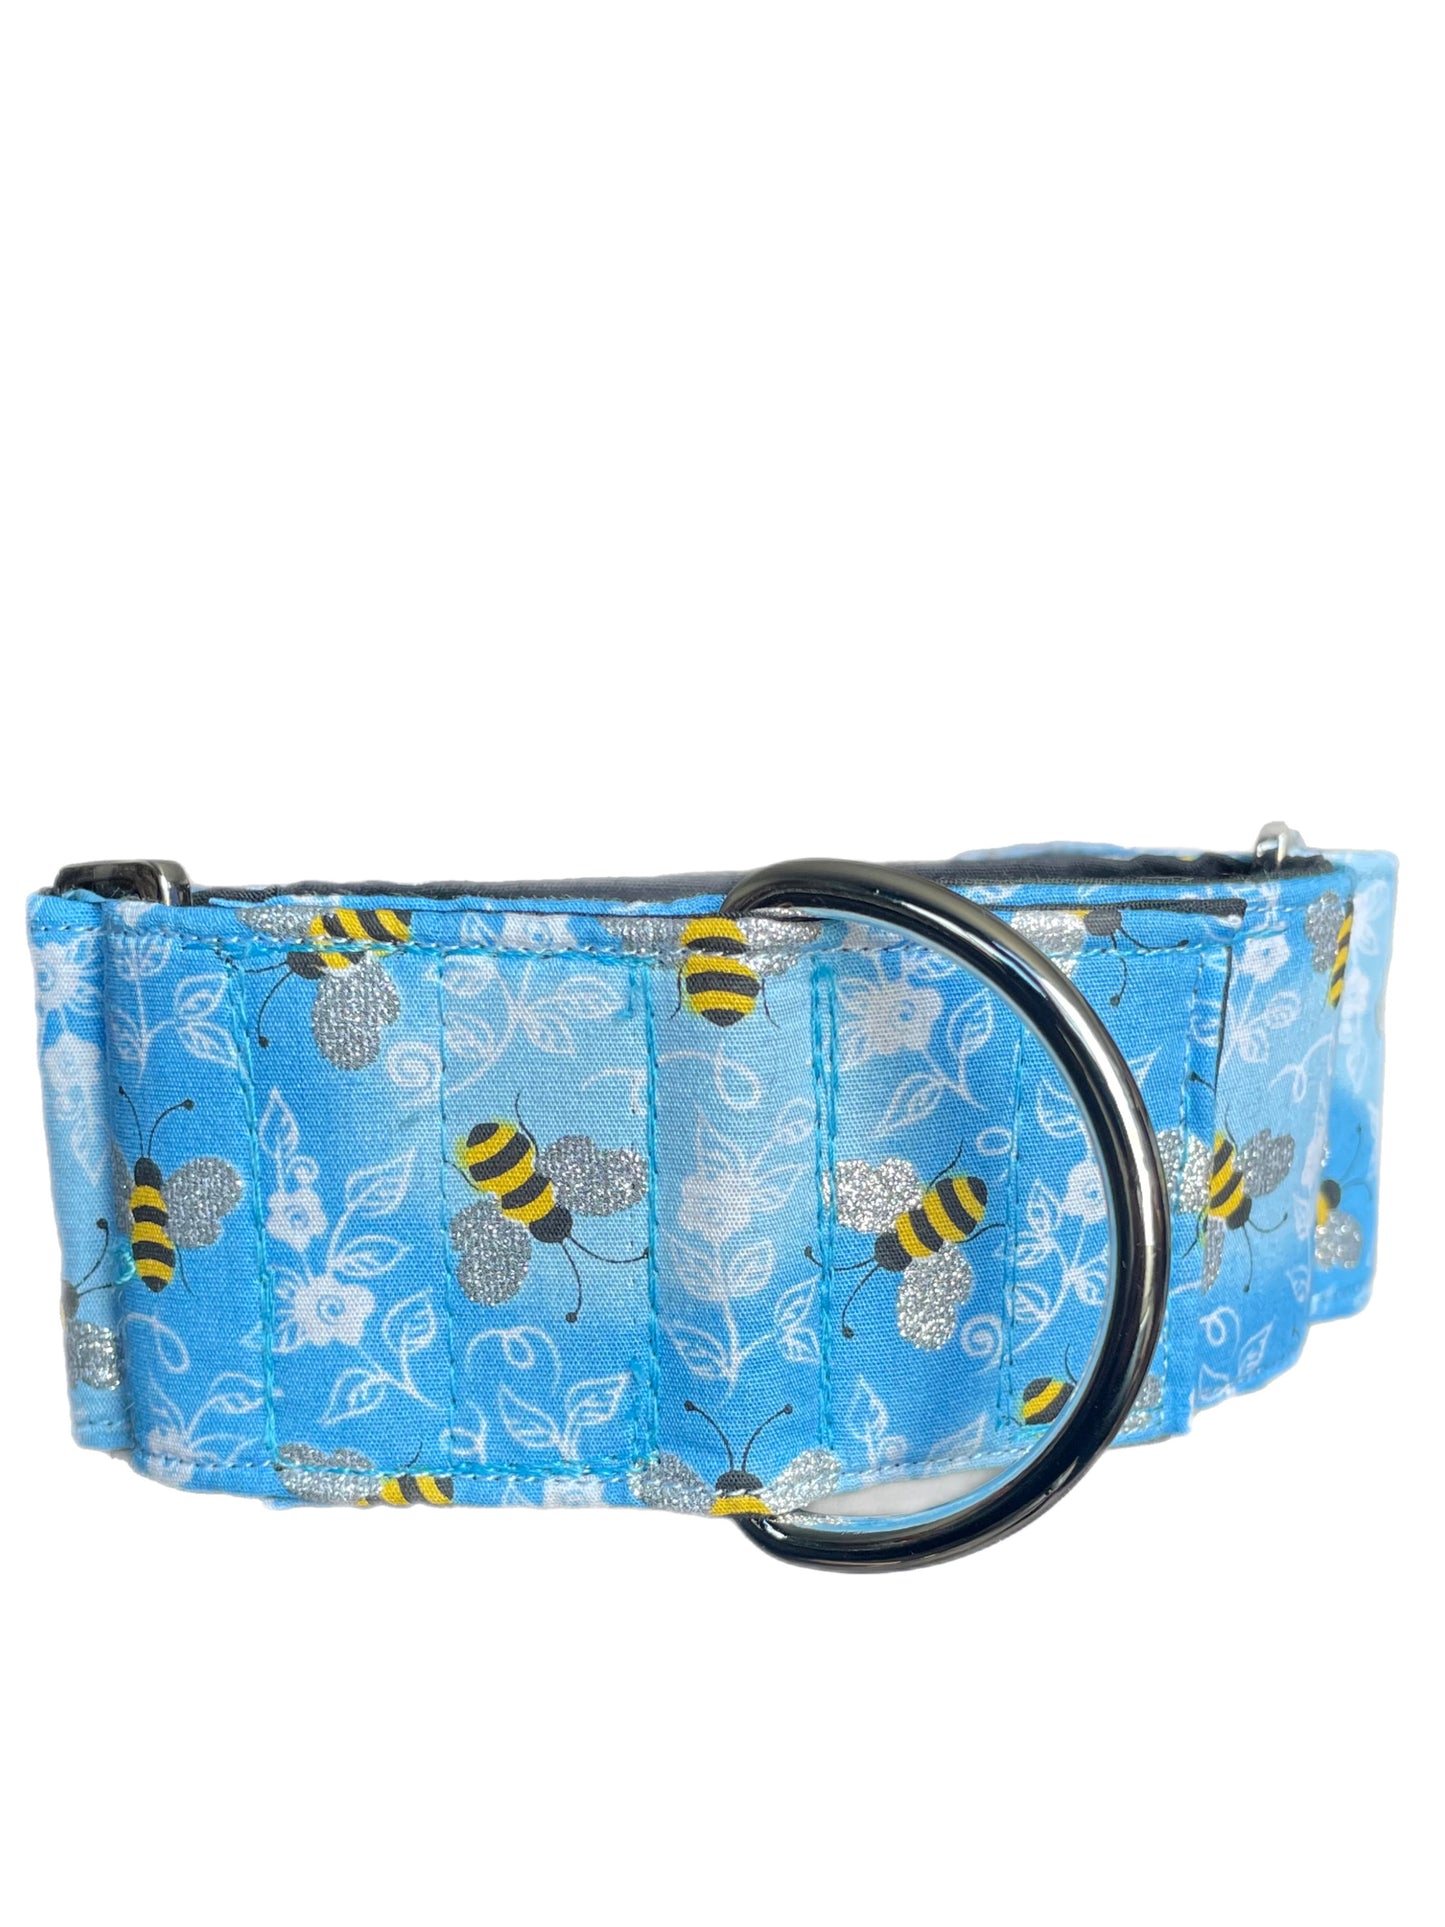 Don’t bee blue sparkles greyhound Martingale collar cotton covered 50mm width super soft whippet